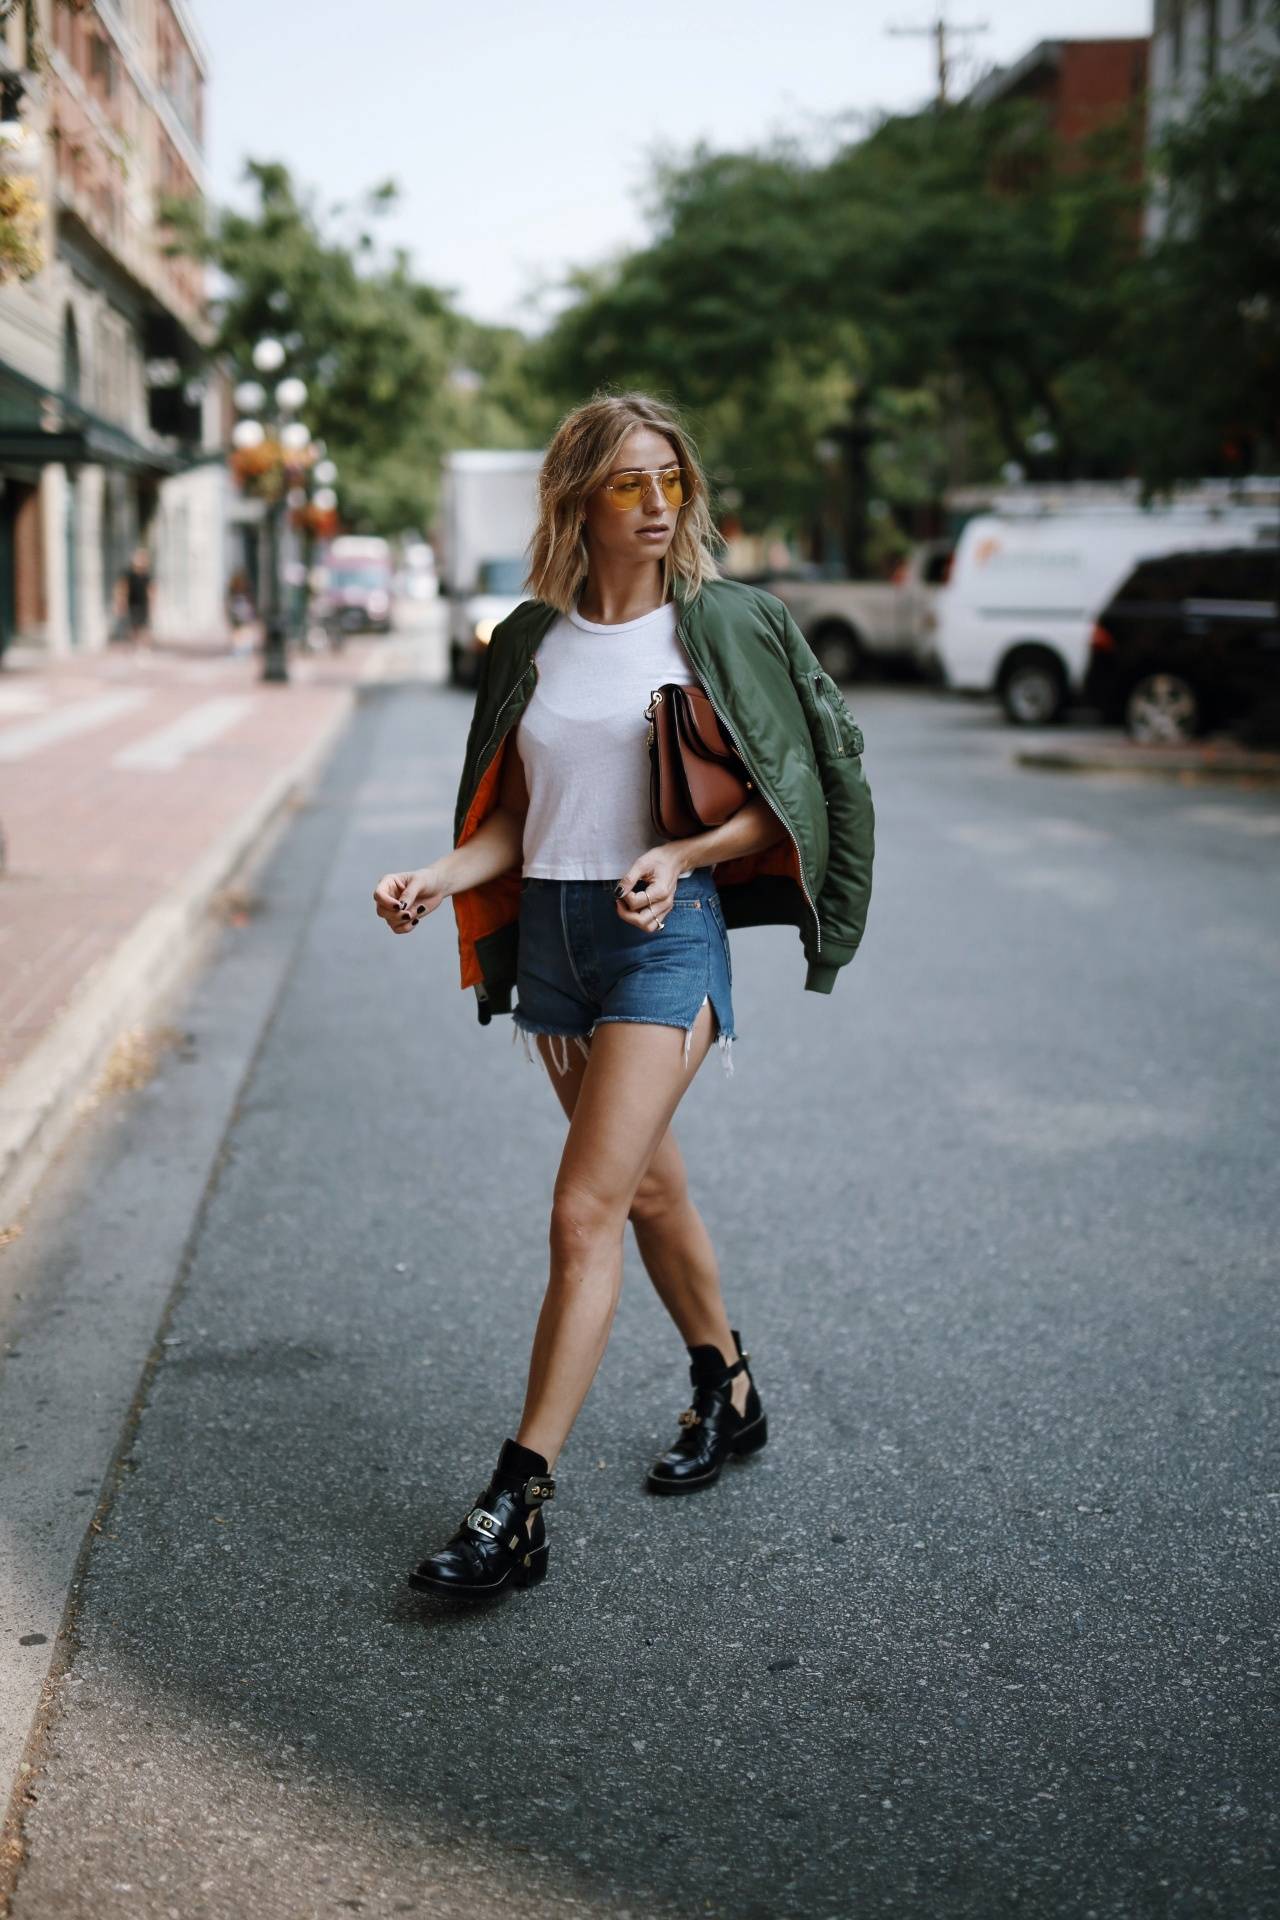 Style and beauty blogger Jill Lansky of The August Diaries on how to mix comfort and style in Re/Done denim shorts and white tee, balenciaga boots